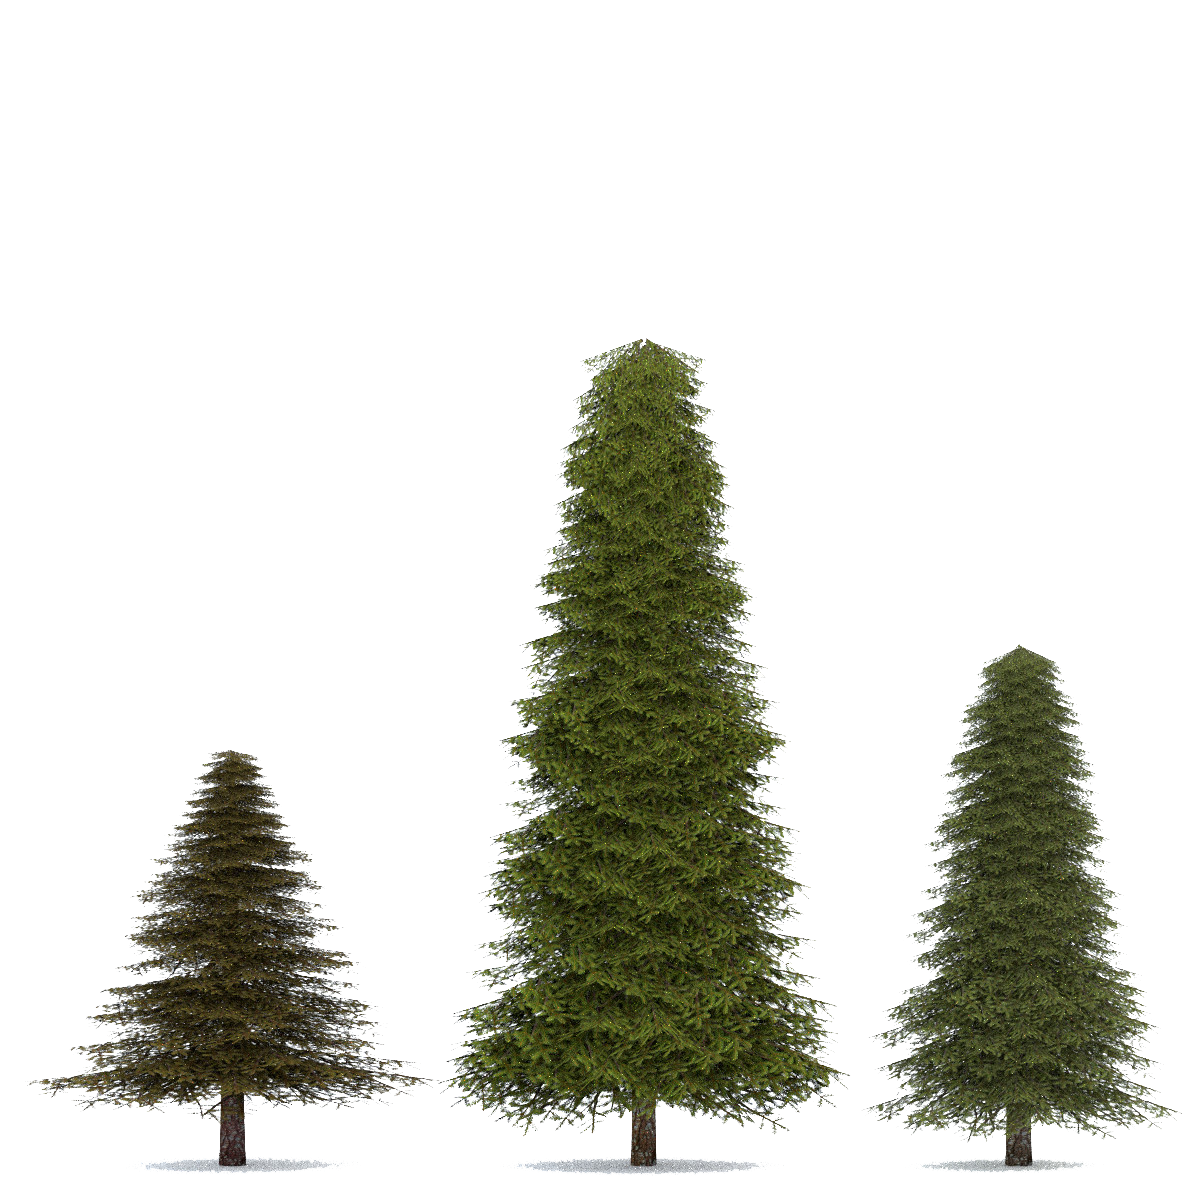 Firtree HD PNG - 91583